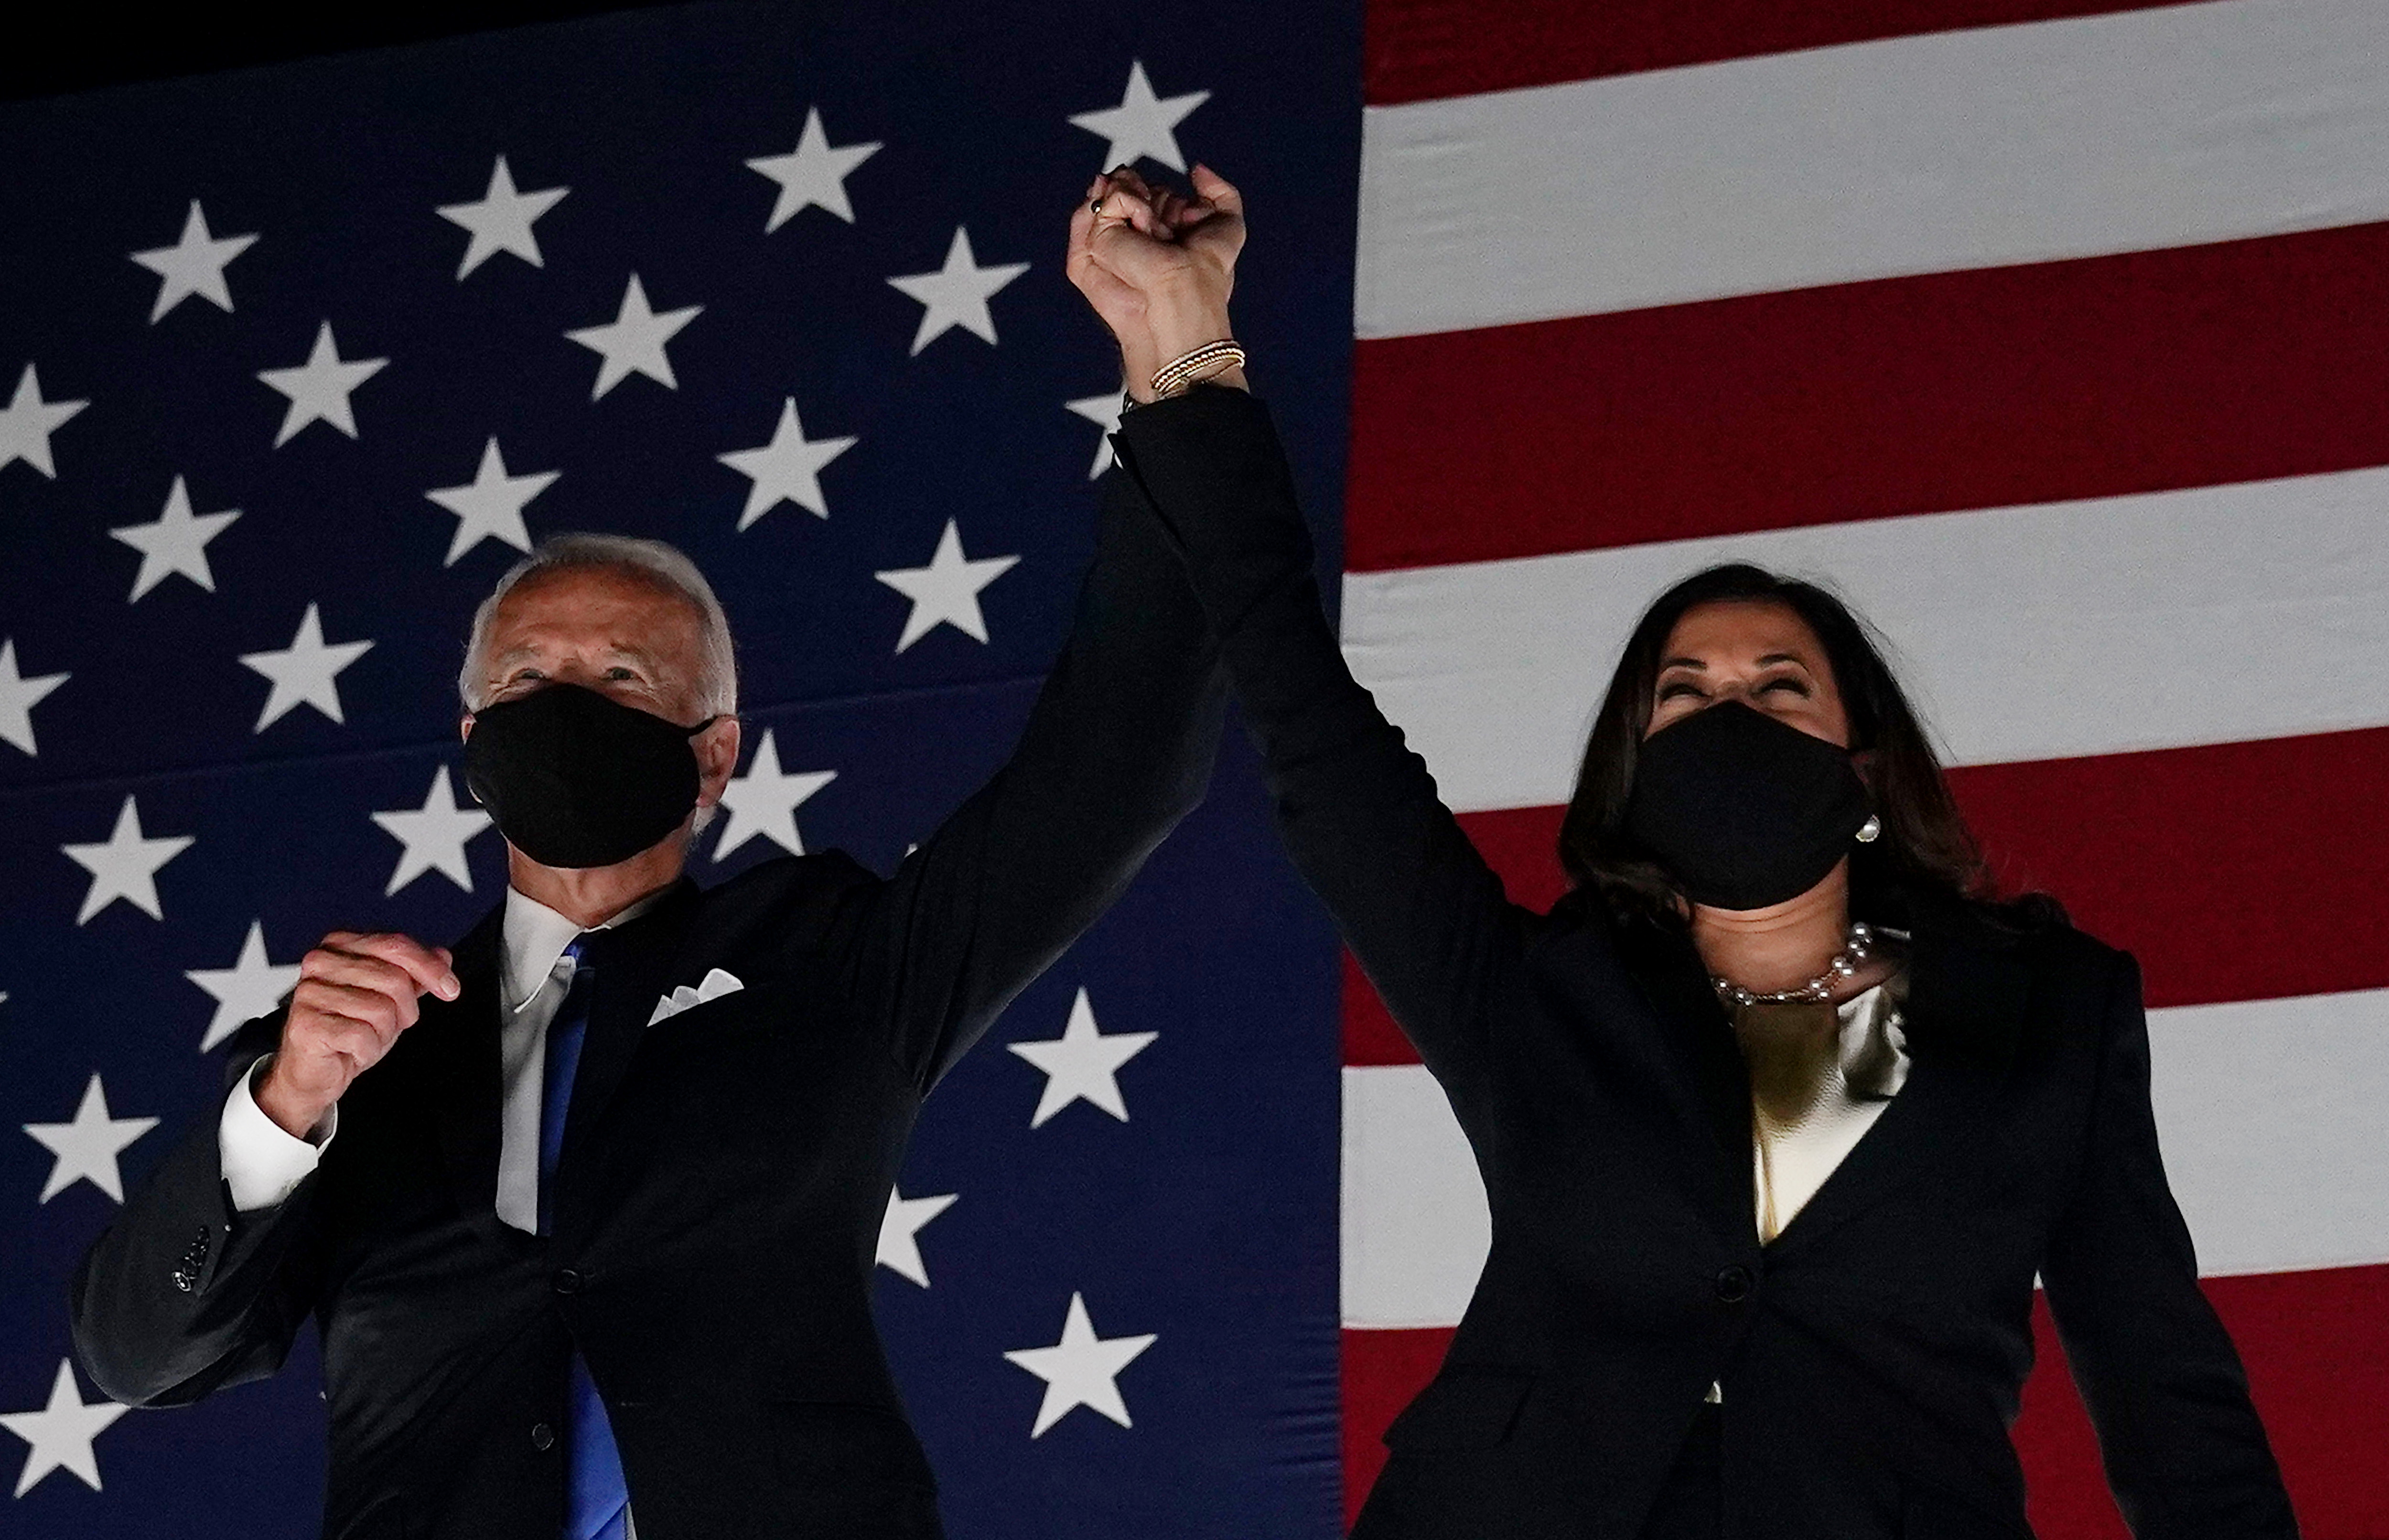 Joe Biden and Kamala Harris raise their held hands in front of a wall-sized American flag backdrop.